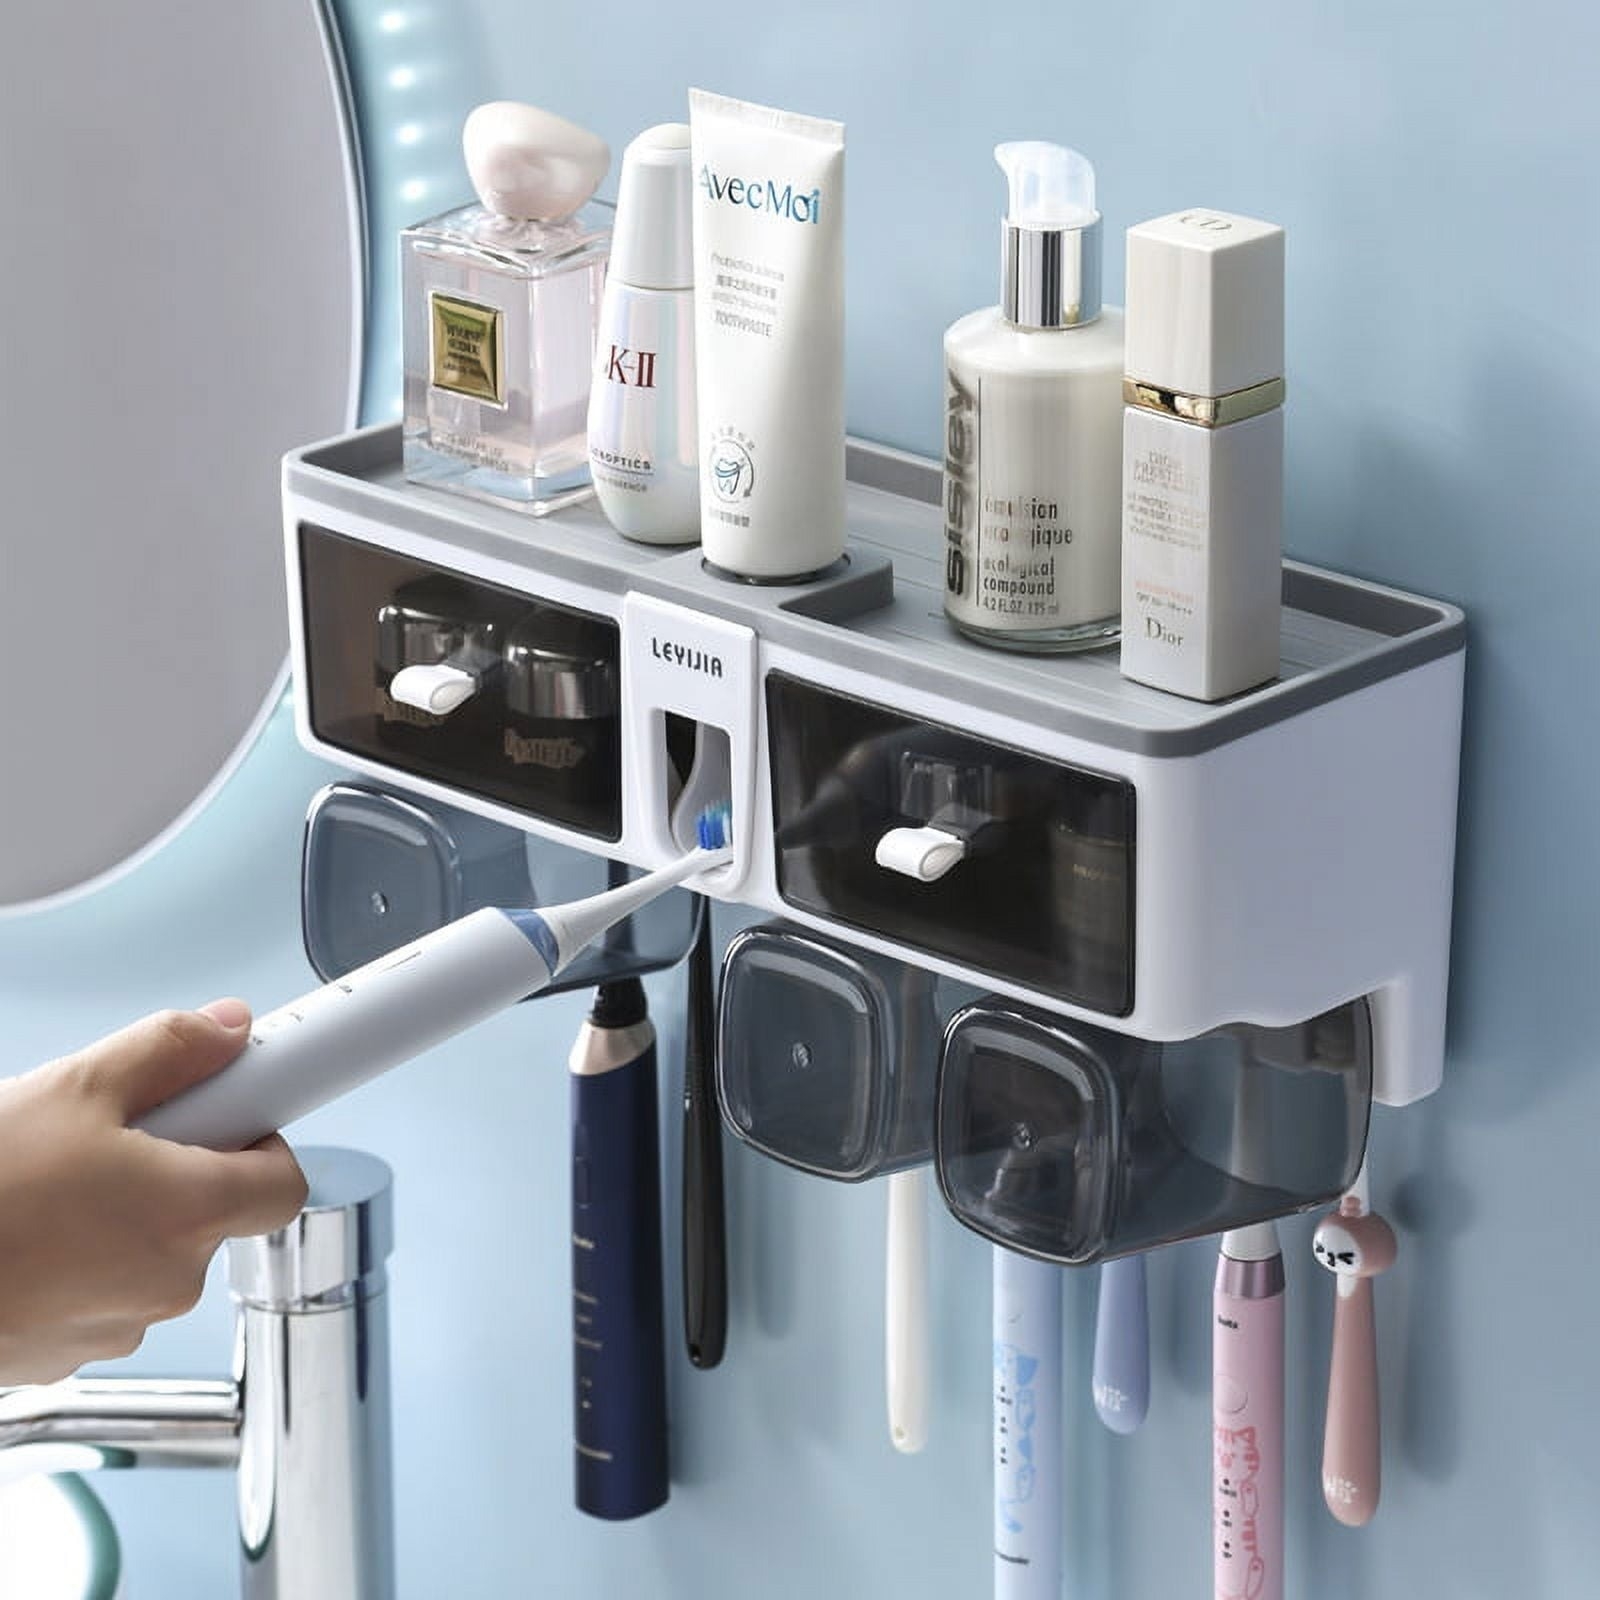 A person placing a toothbrush into the toothpaste dispenser portion of the mounted toothbrush holder